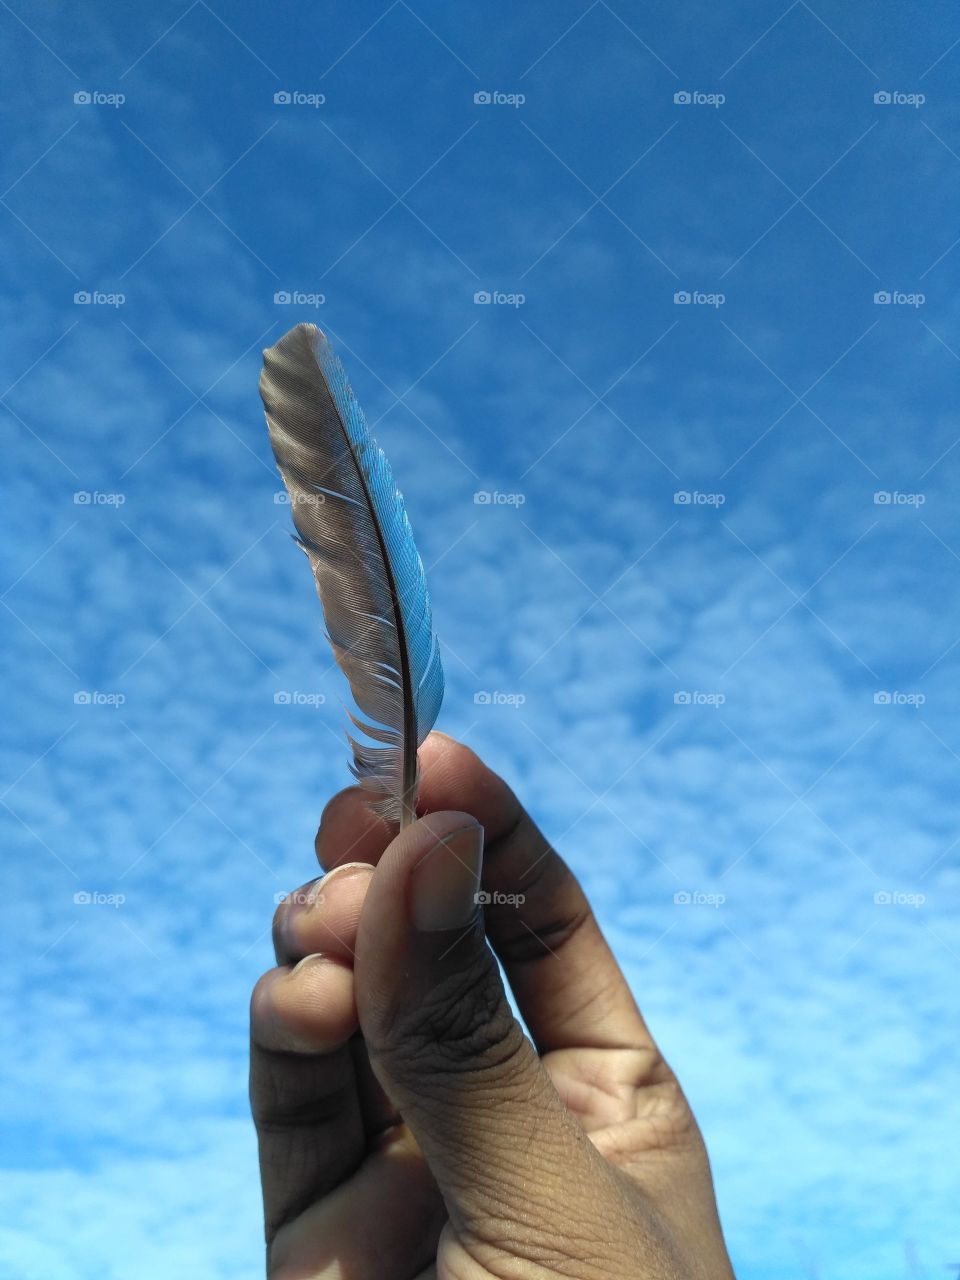 Kingfisher Feather